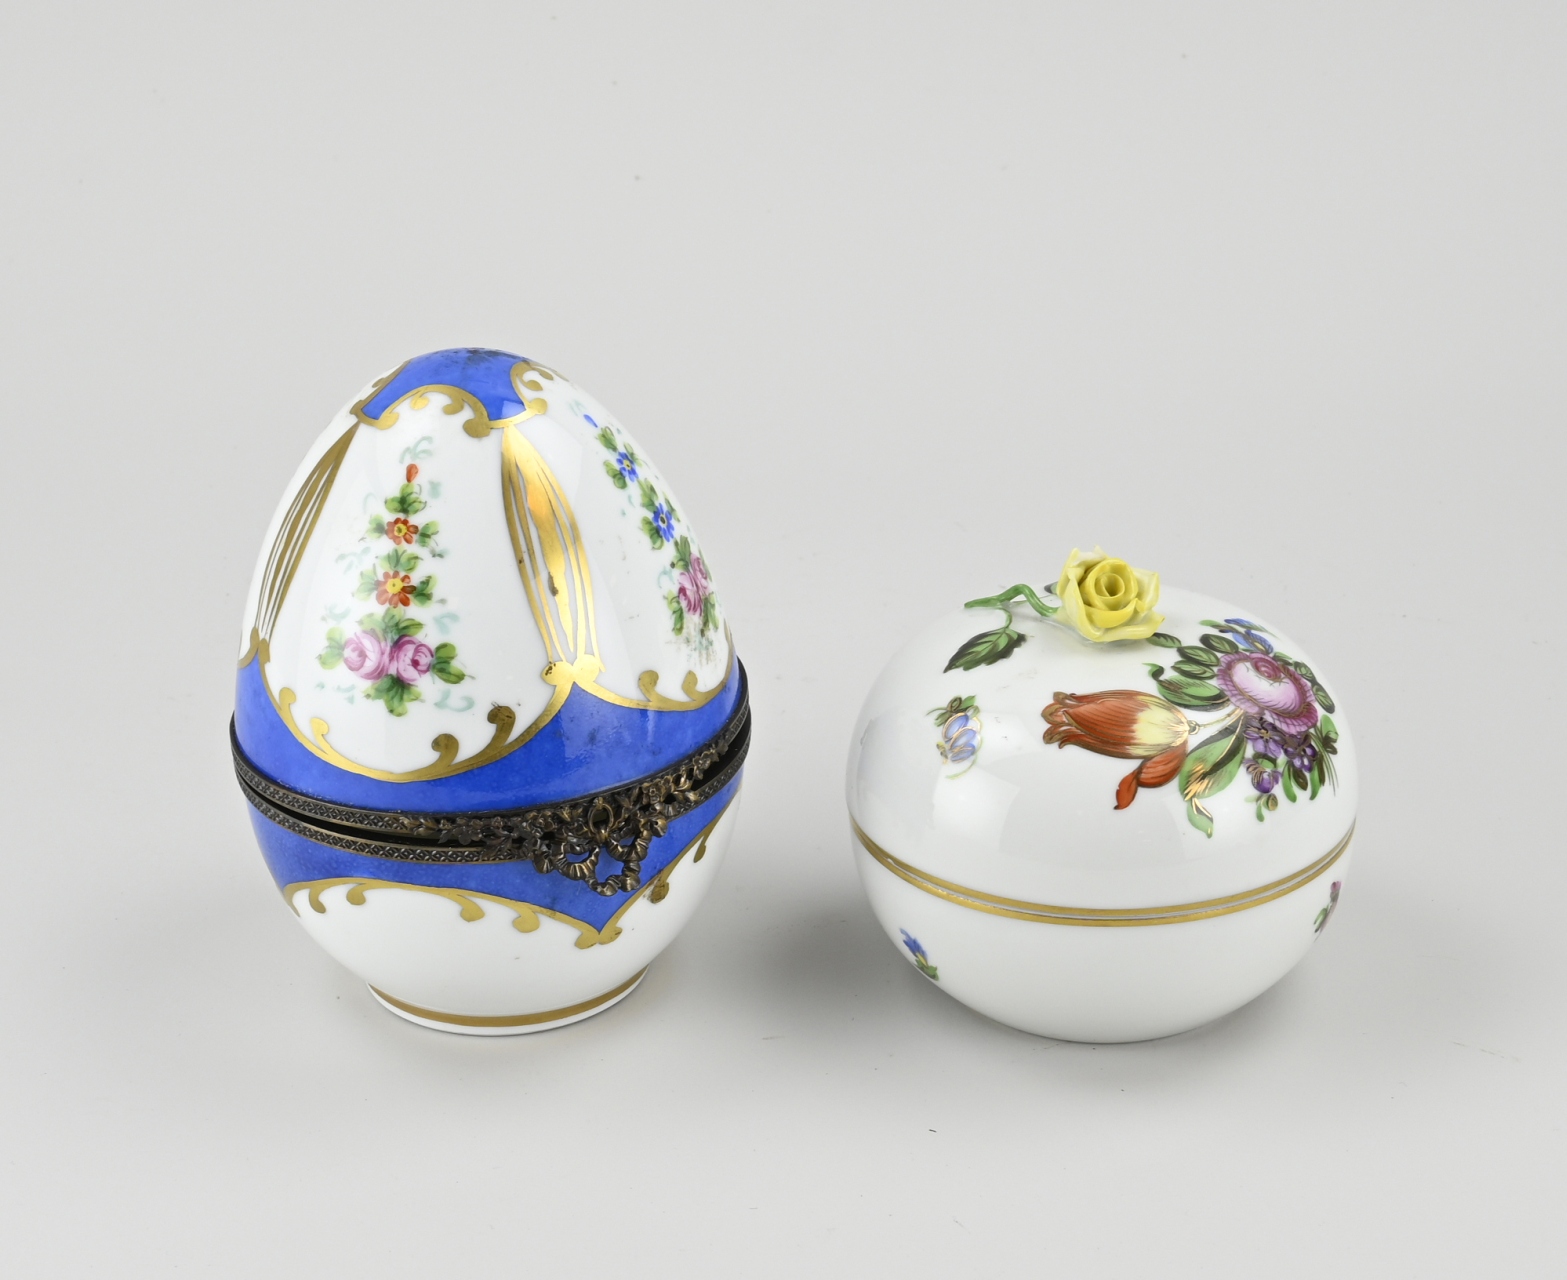 Two hand-painted porcelain lidded boxes. 20th century. 1x Limoges, egg-shaped with floral/gold decor. 1x Herend, floral/gold decor, chip rose.